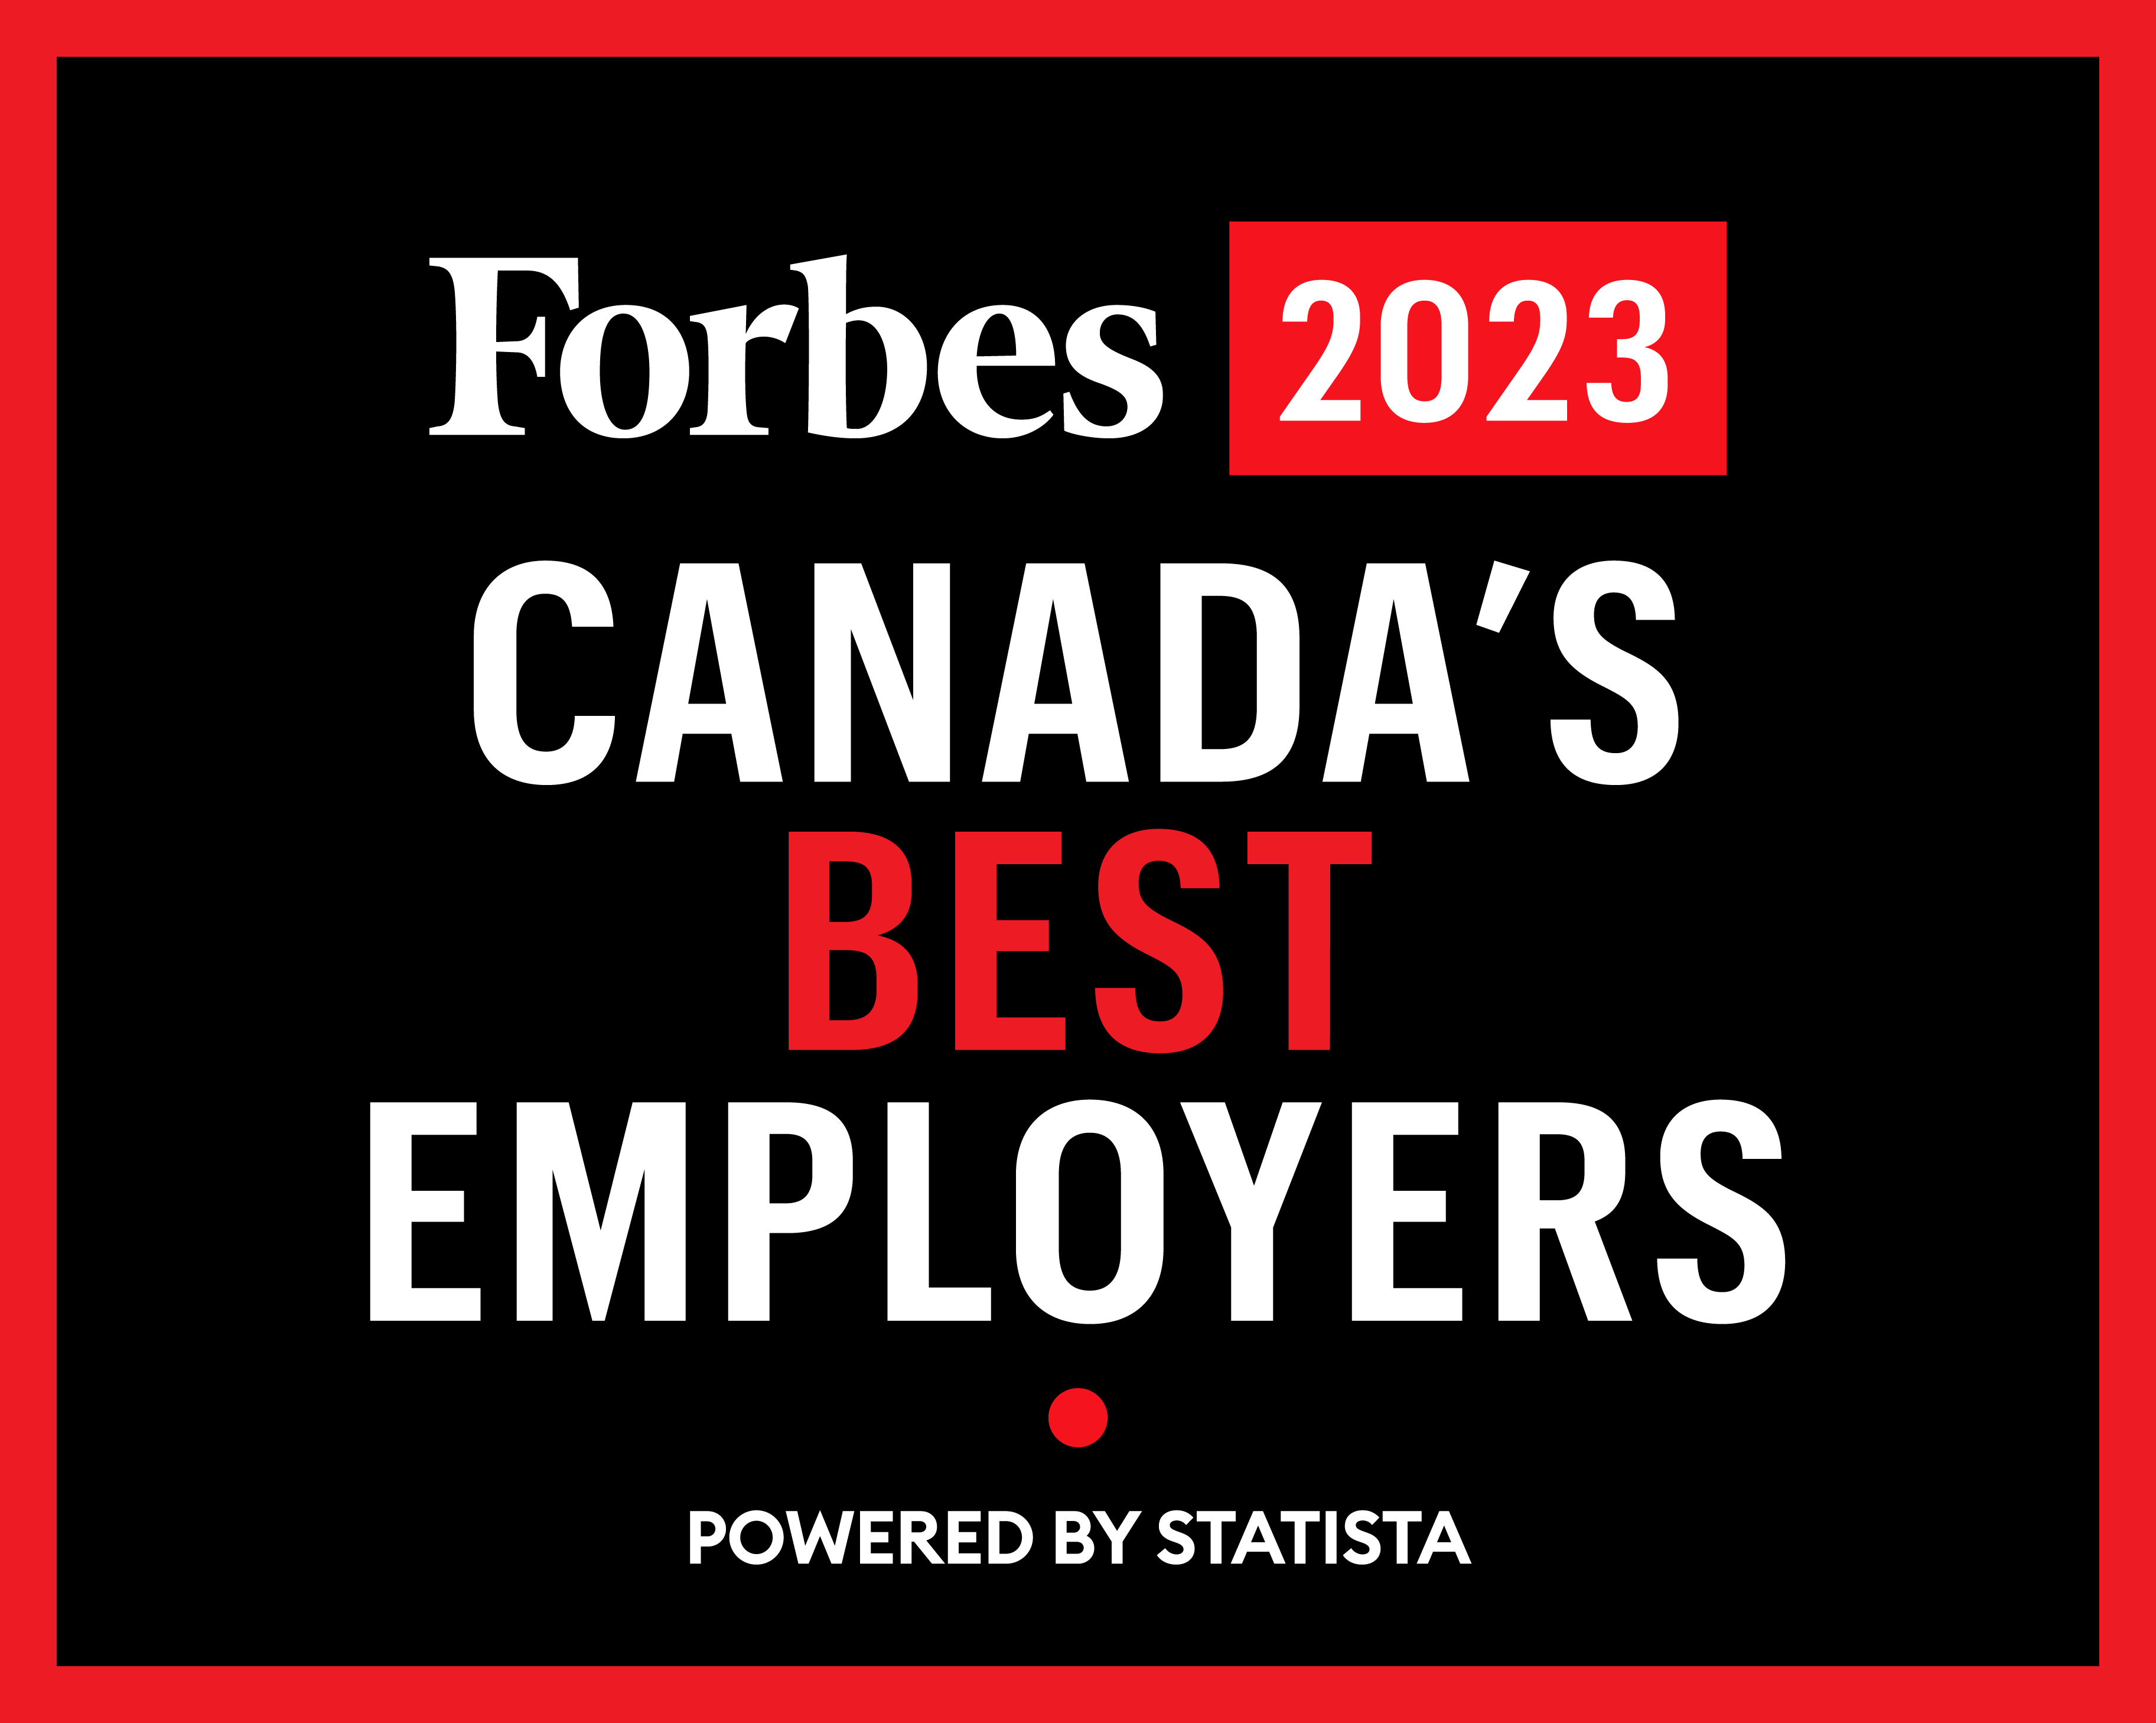 SD43 named to Forbes 2023 Canada's Best Employer list 